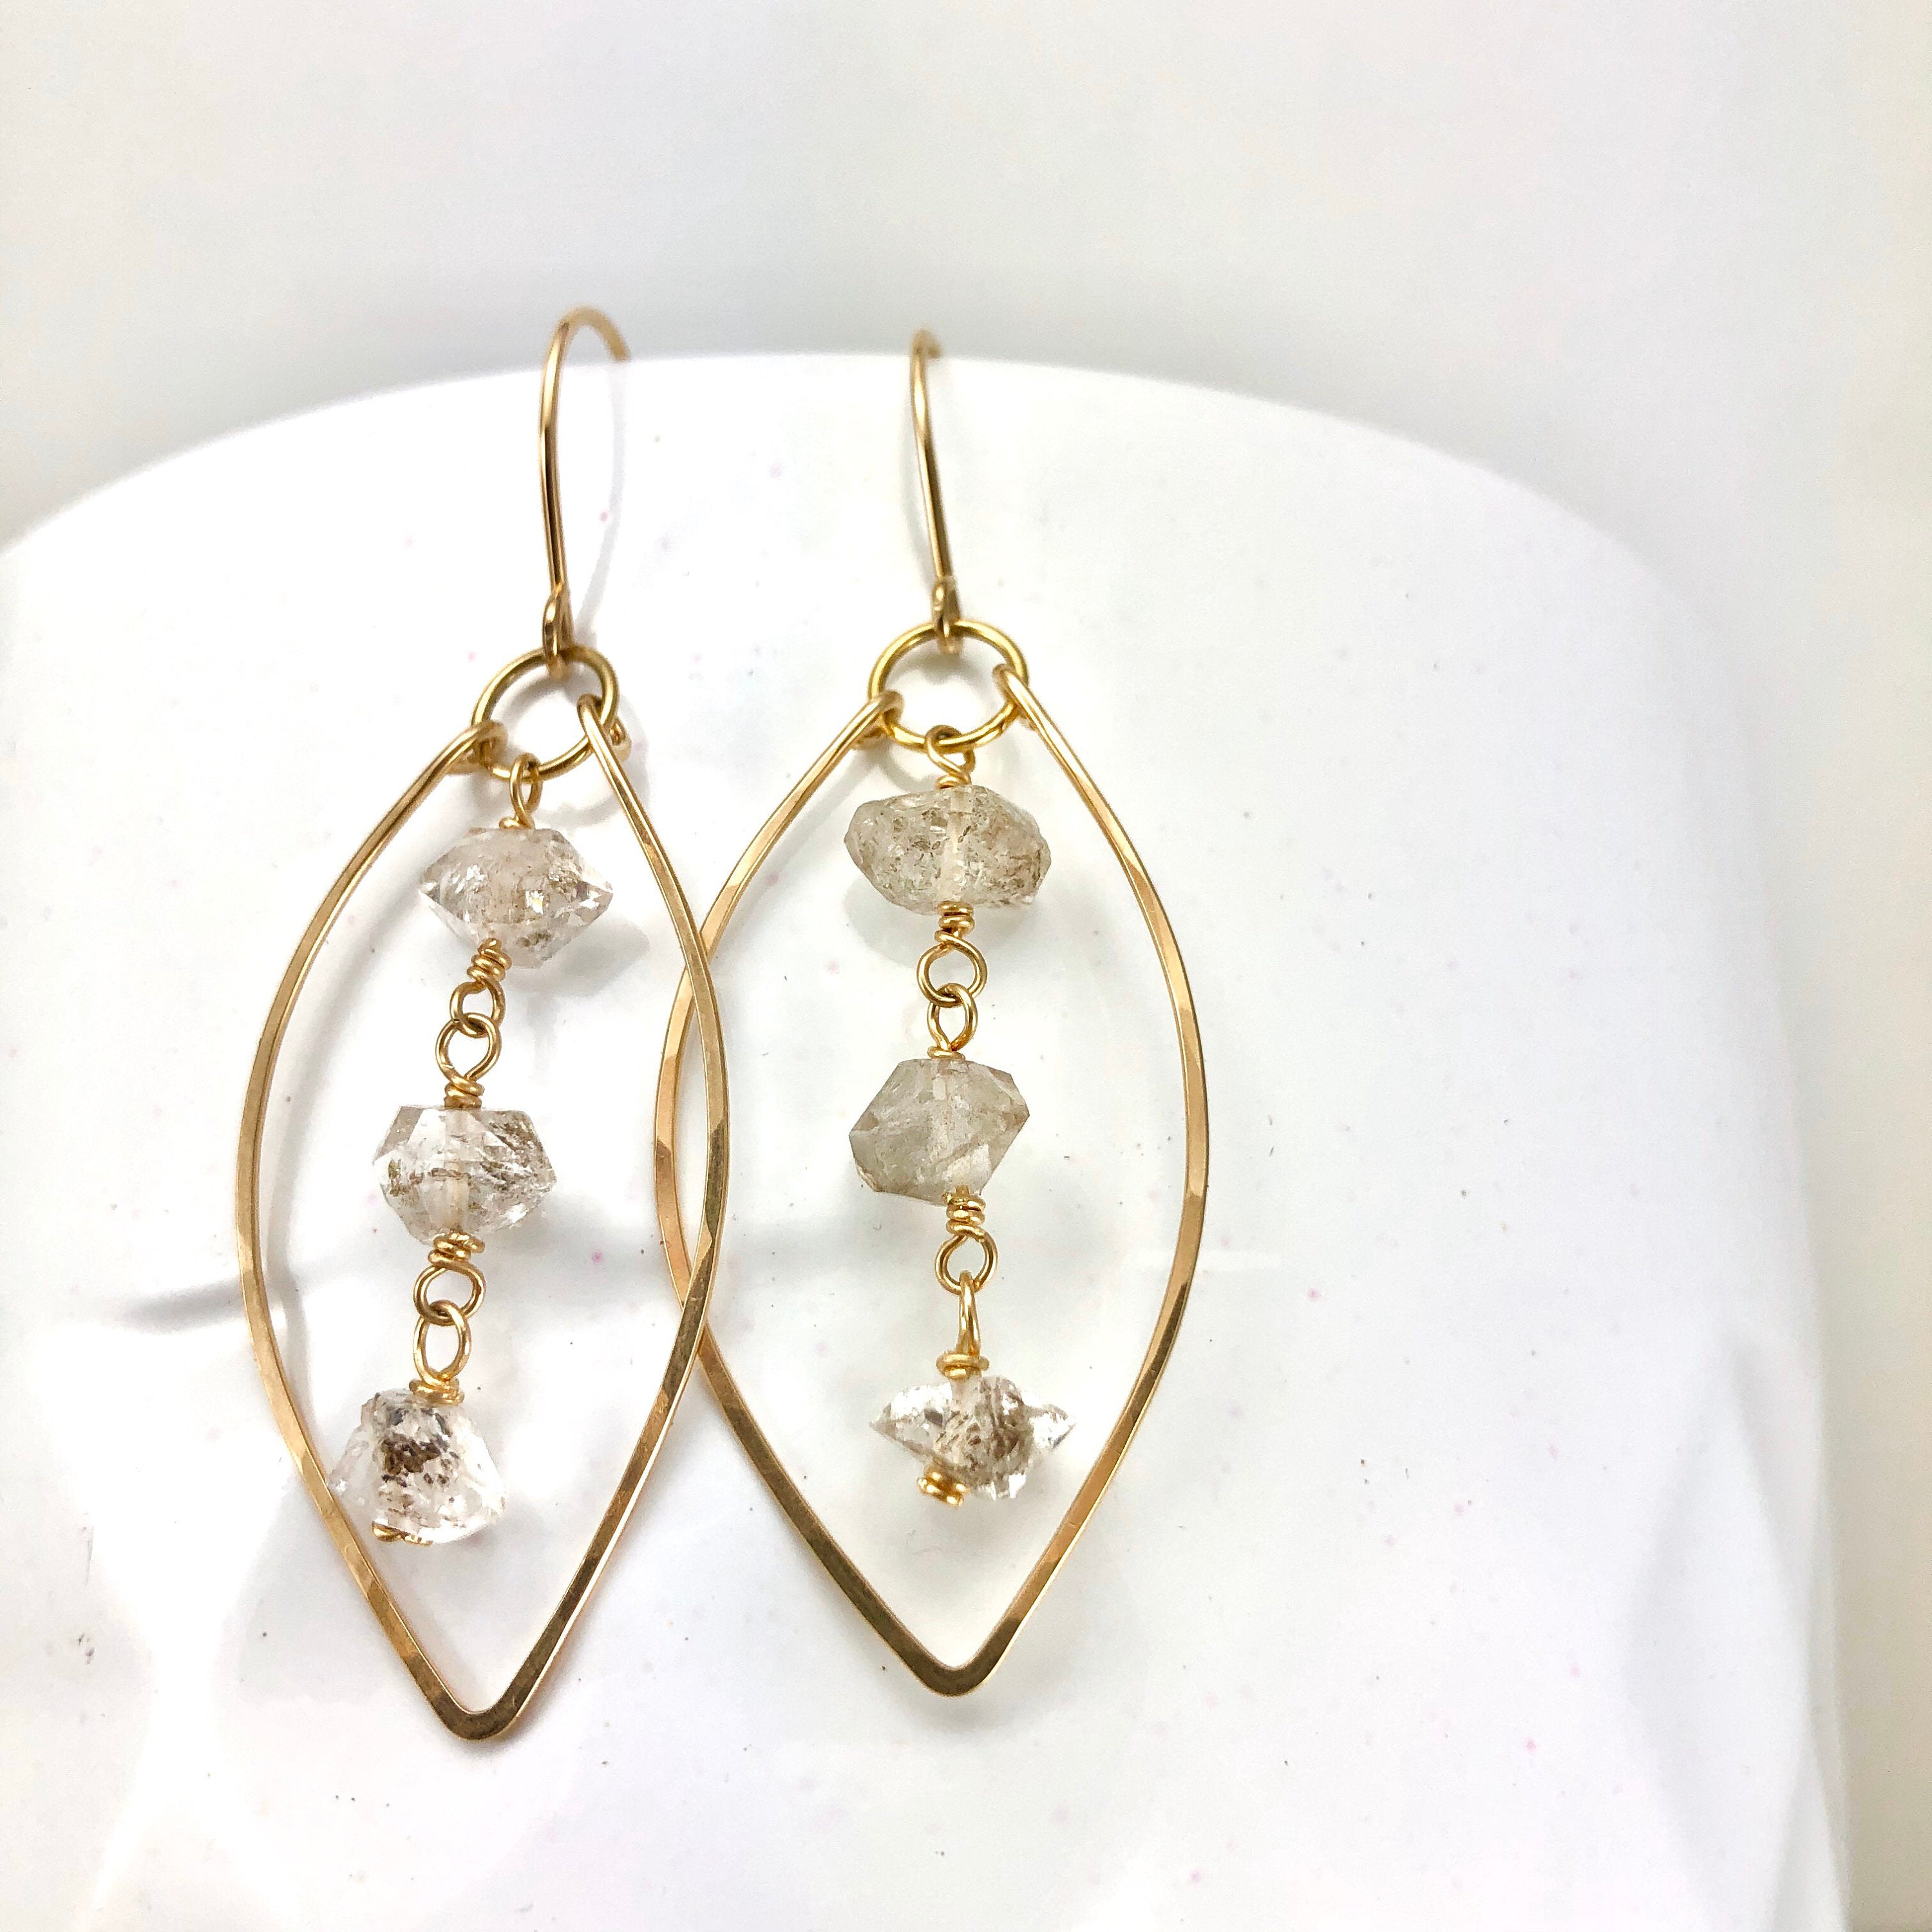 Gold Leaf Earrings with Herkimer Diamonds